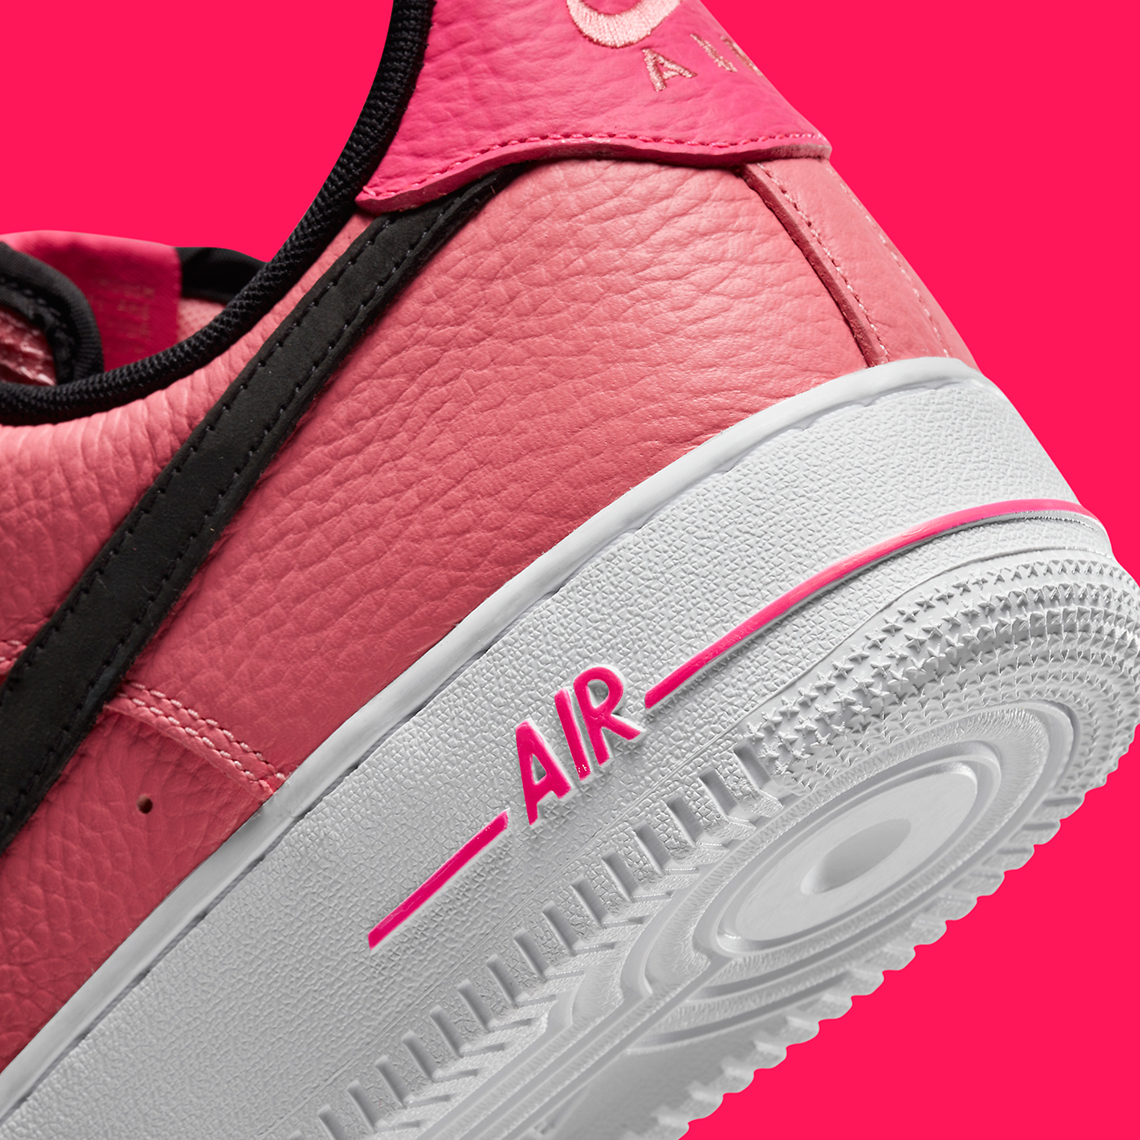 nike naive air force 1 low pink tumbled leather DZ4861 600 8